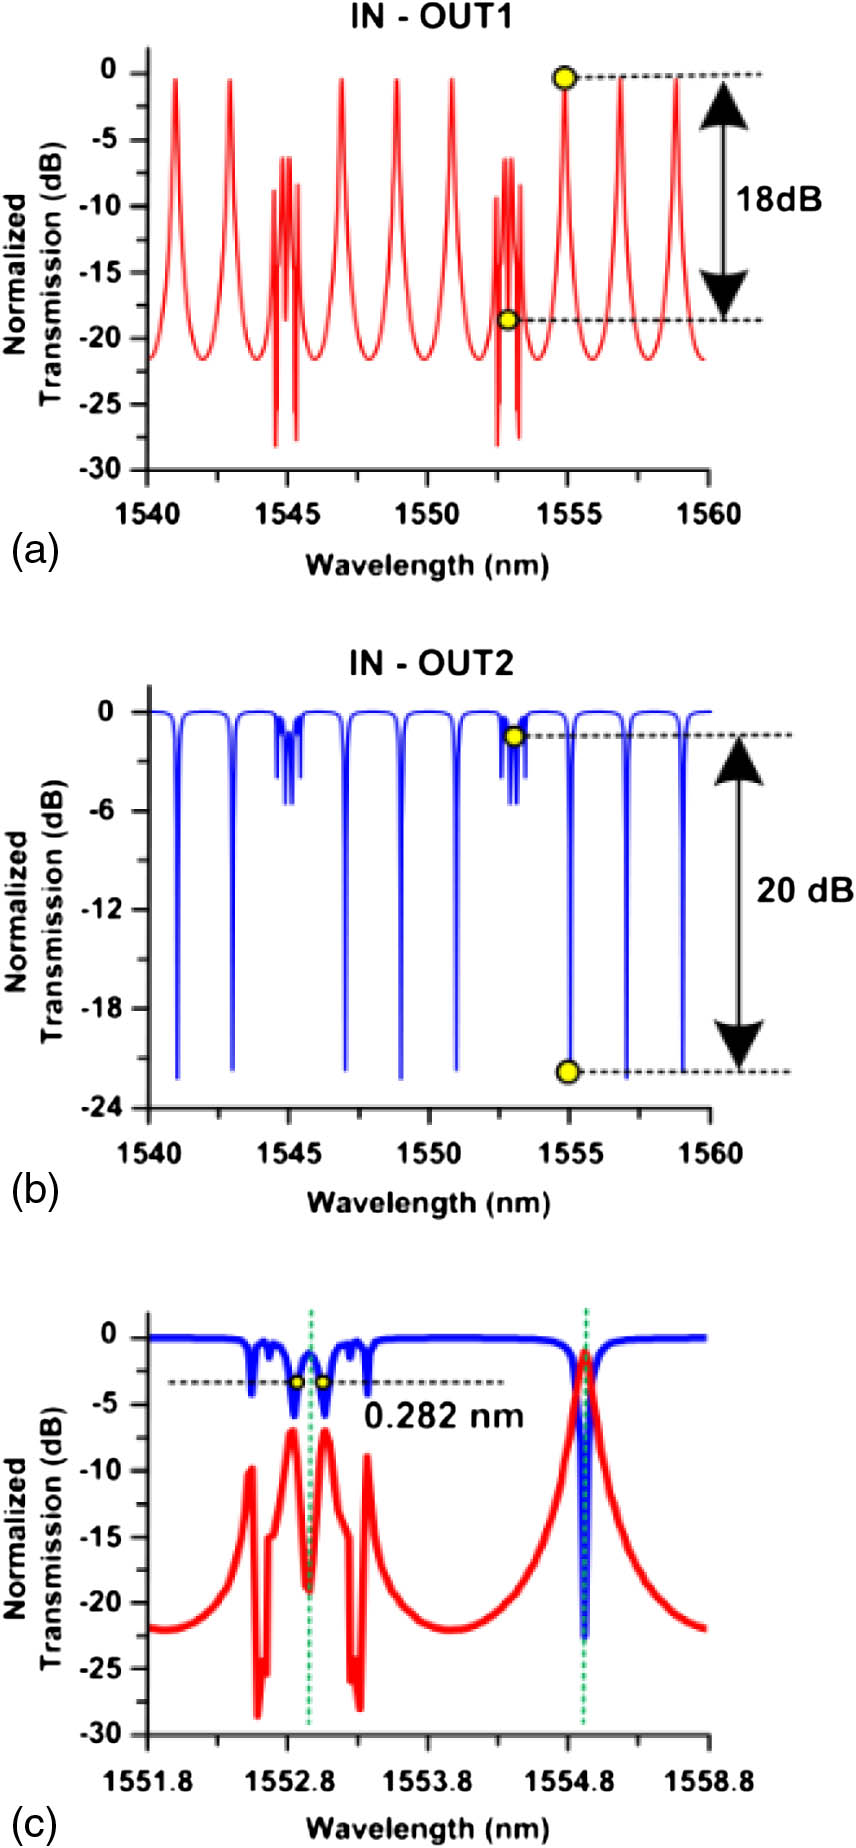 (a) Normalized transmission spectrum from IN to OUT1. (b) Normalized transmission spectrum from IN to OUT2. (c) Zoom-in view of (a) and (b) in the wavelength range of 1551.8–1555.8 nm.